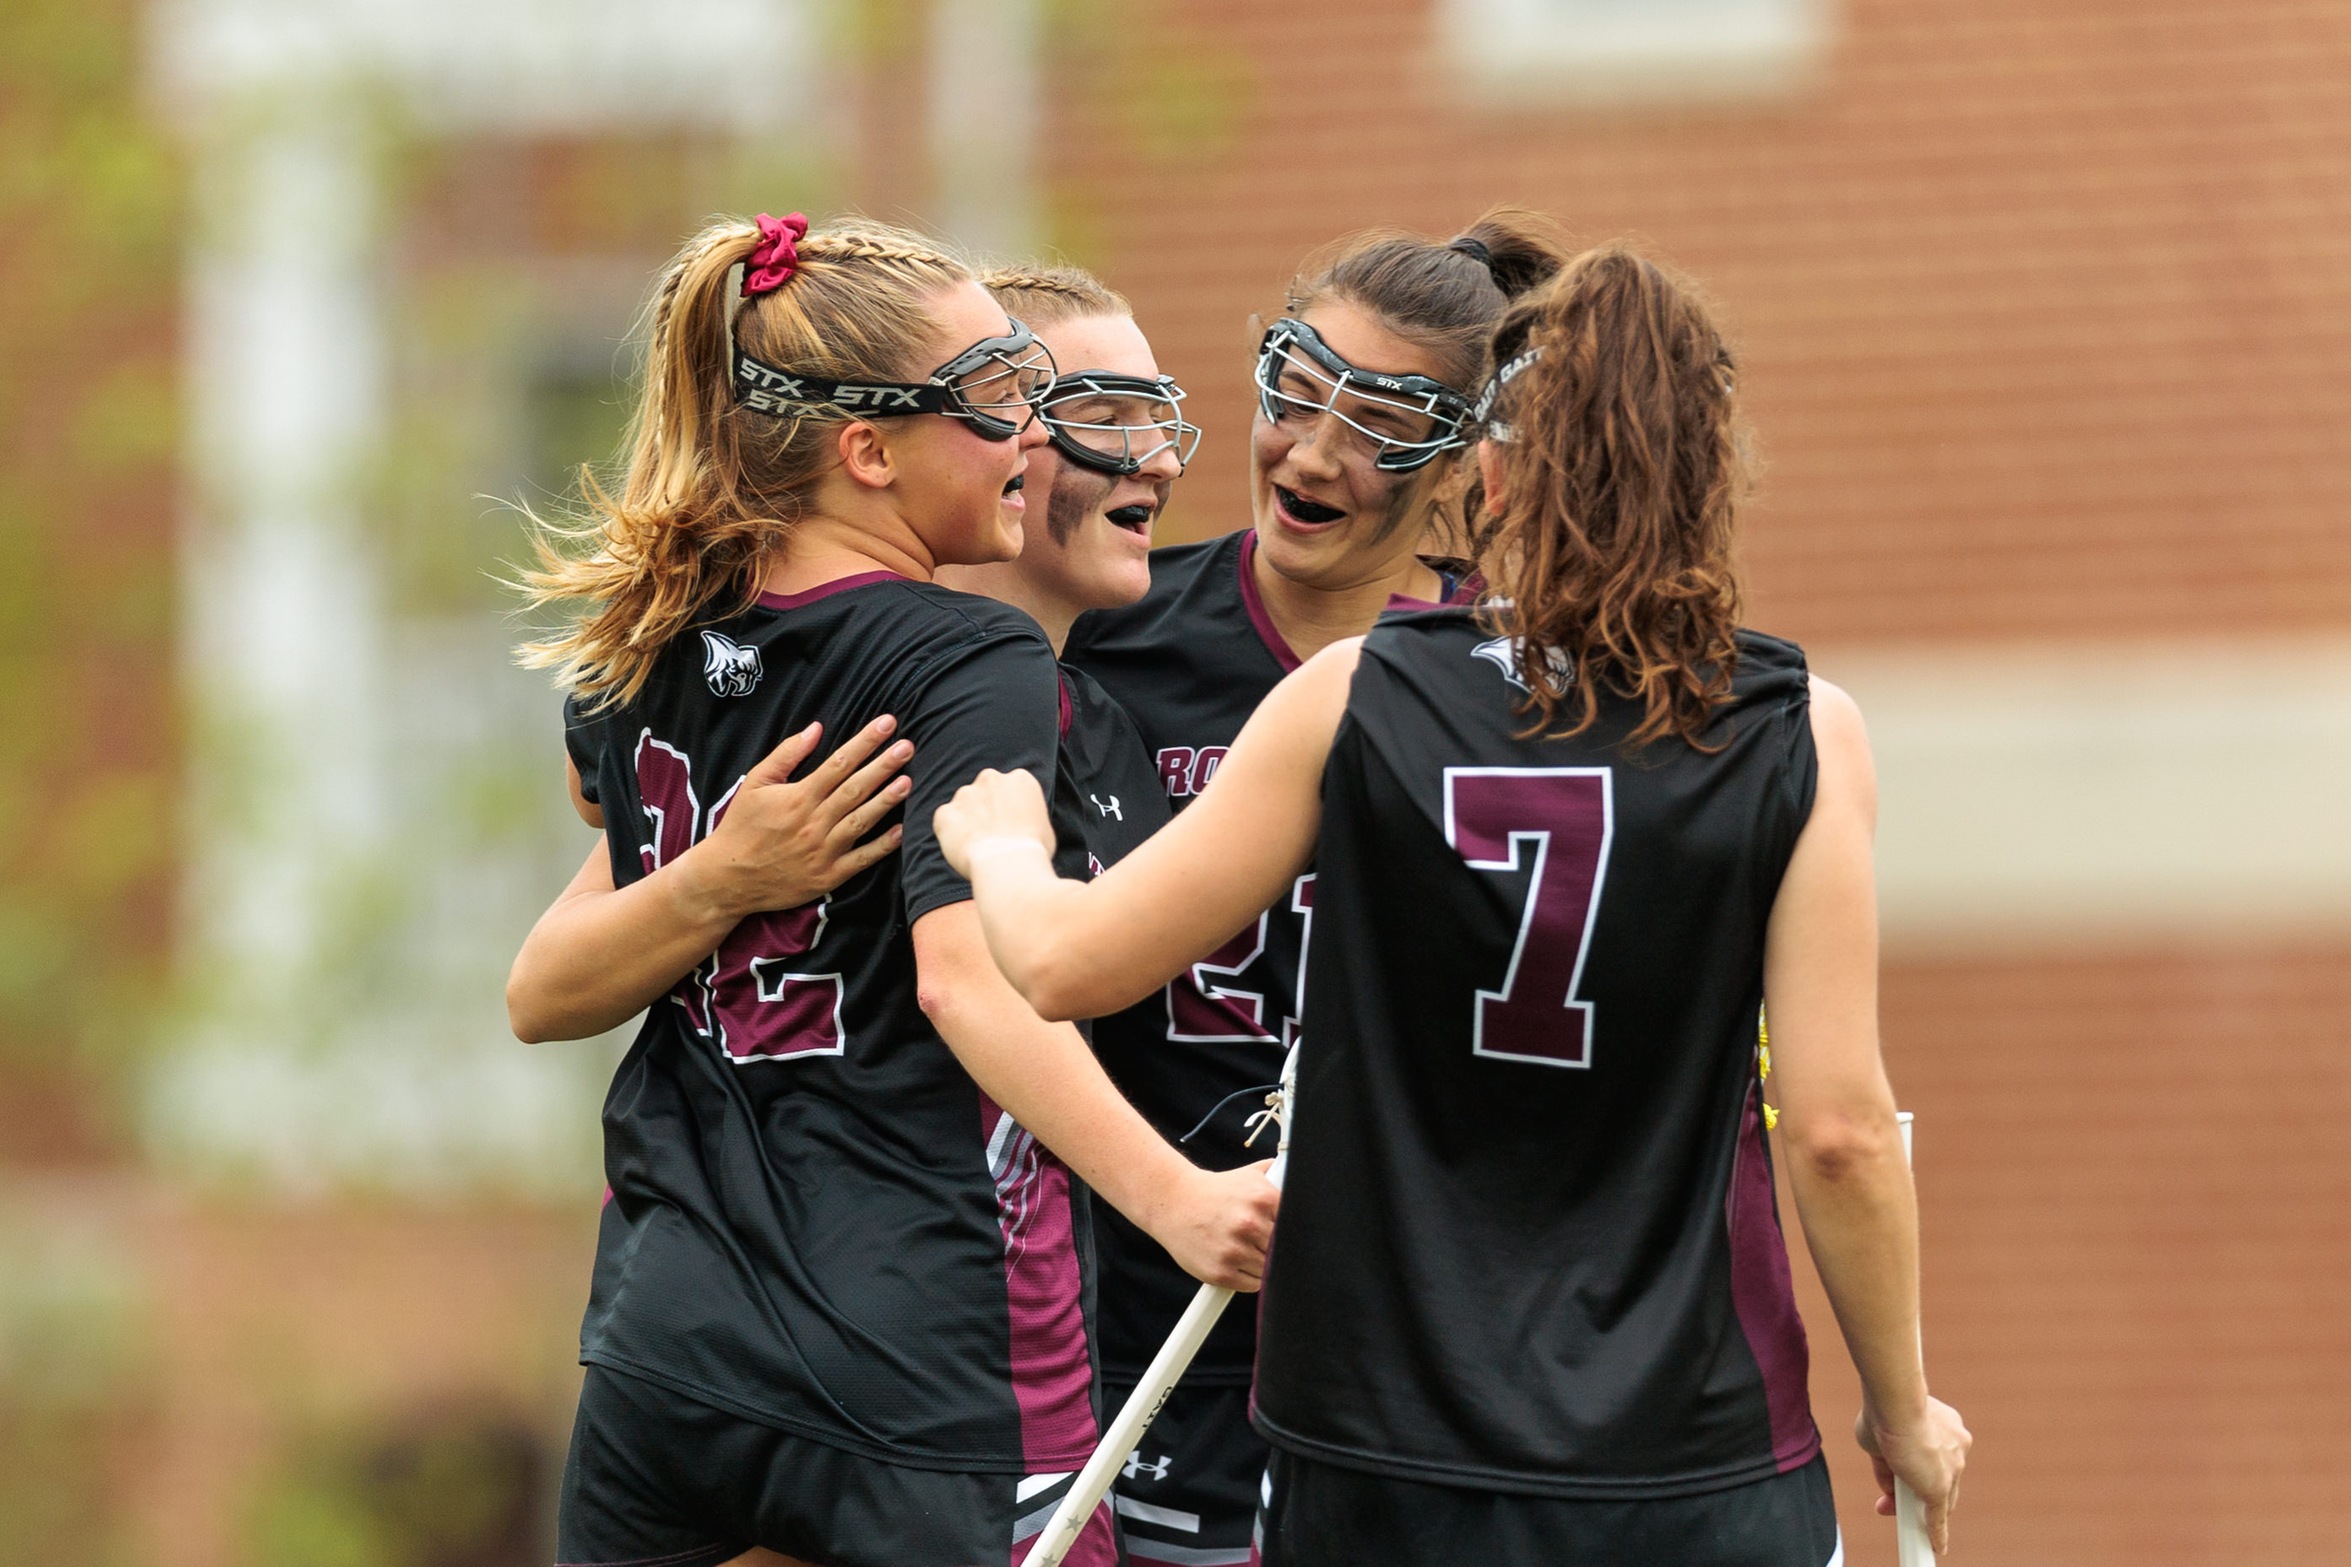 Maroons Win NCAA First Round Contest With Bryn Athyn, 22-3